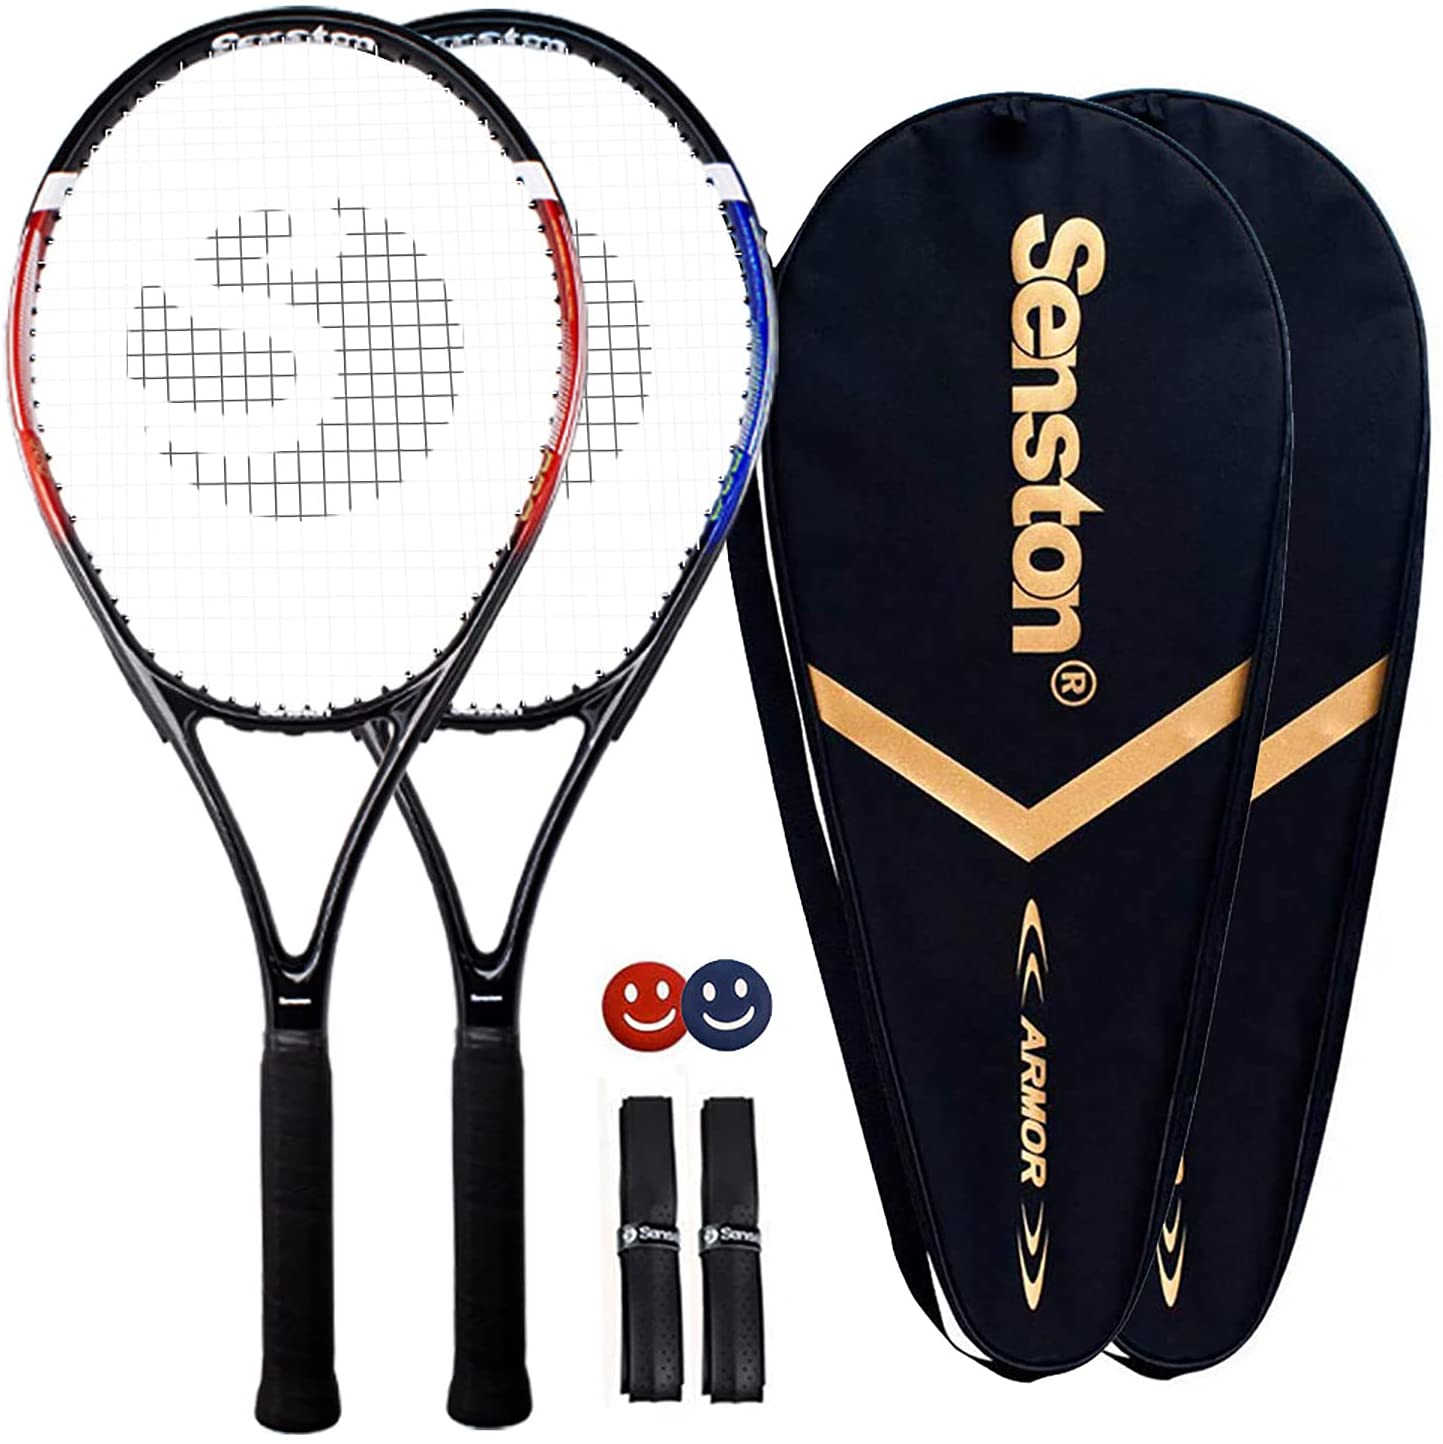 Senston Double Women’s Tennis Racquets With Covers